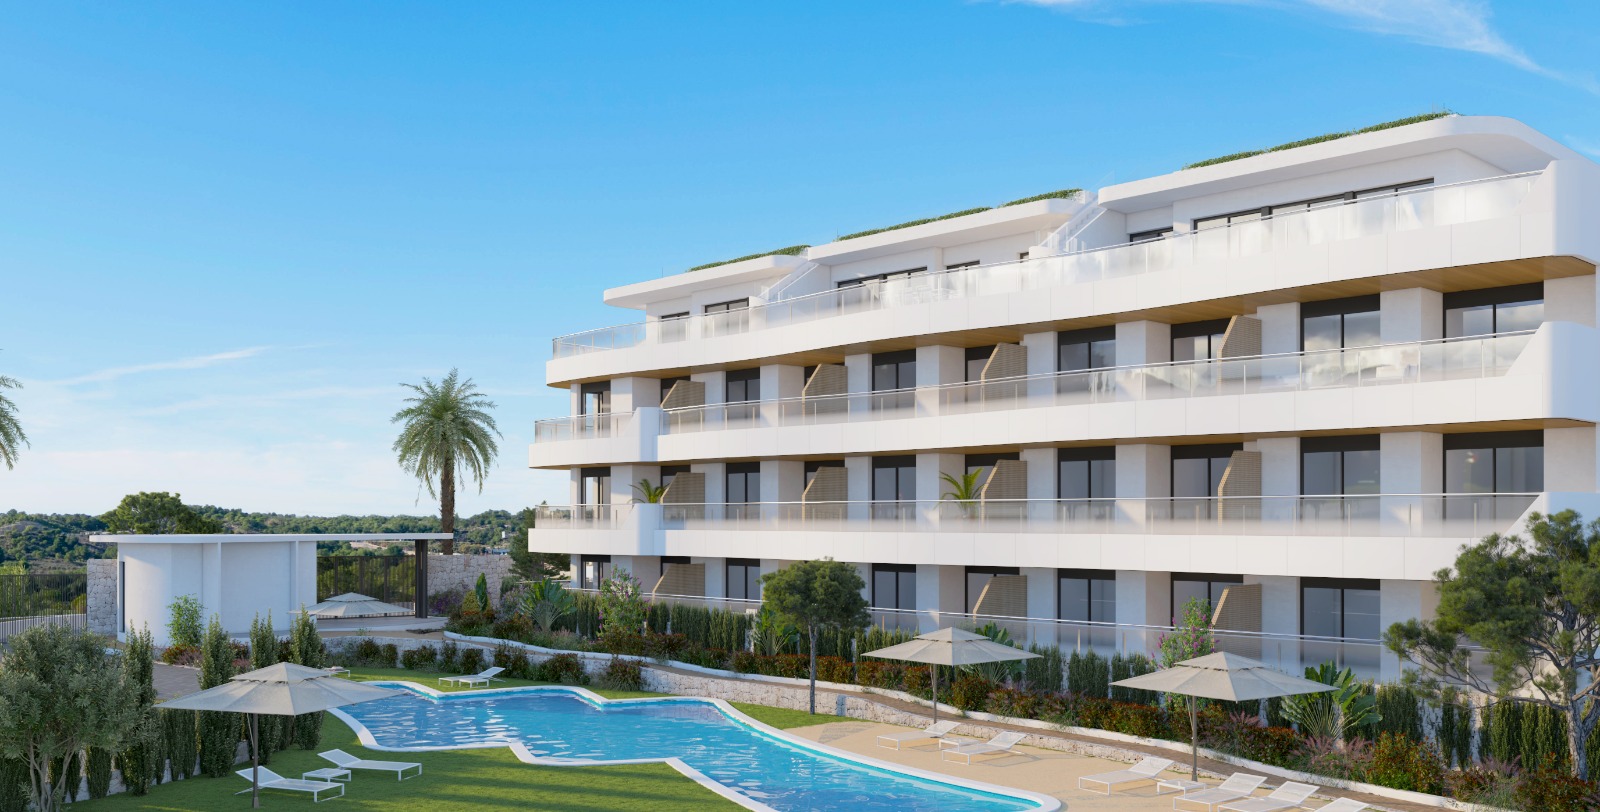 Stunning new-built penthouses for sale with sea views in Playa Flamenca.